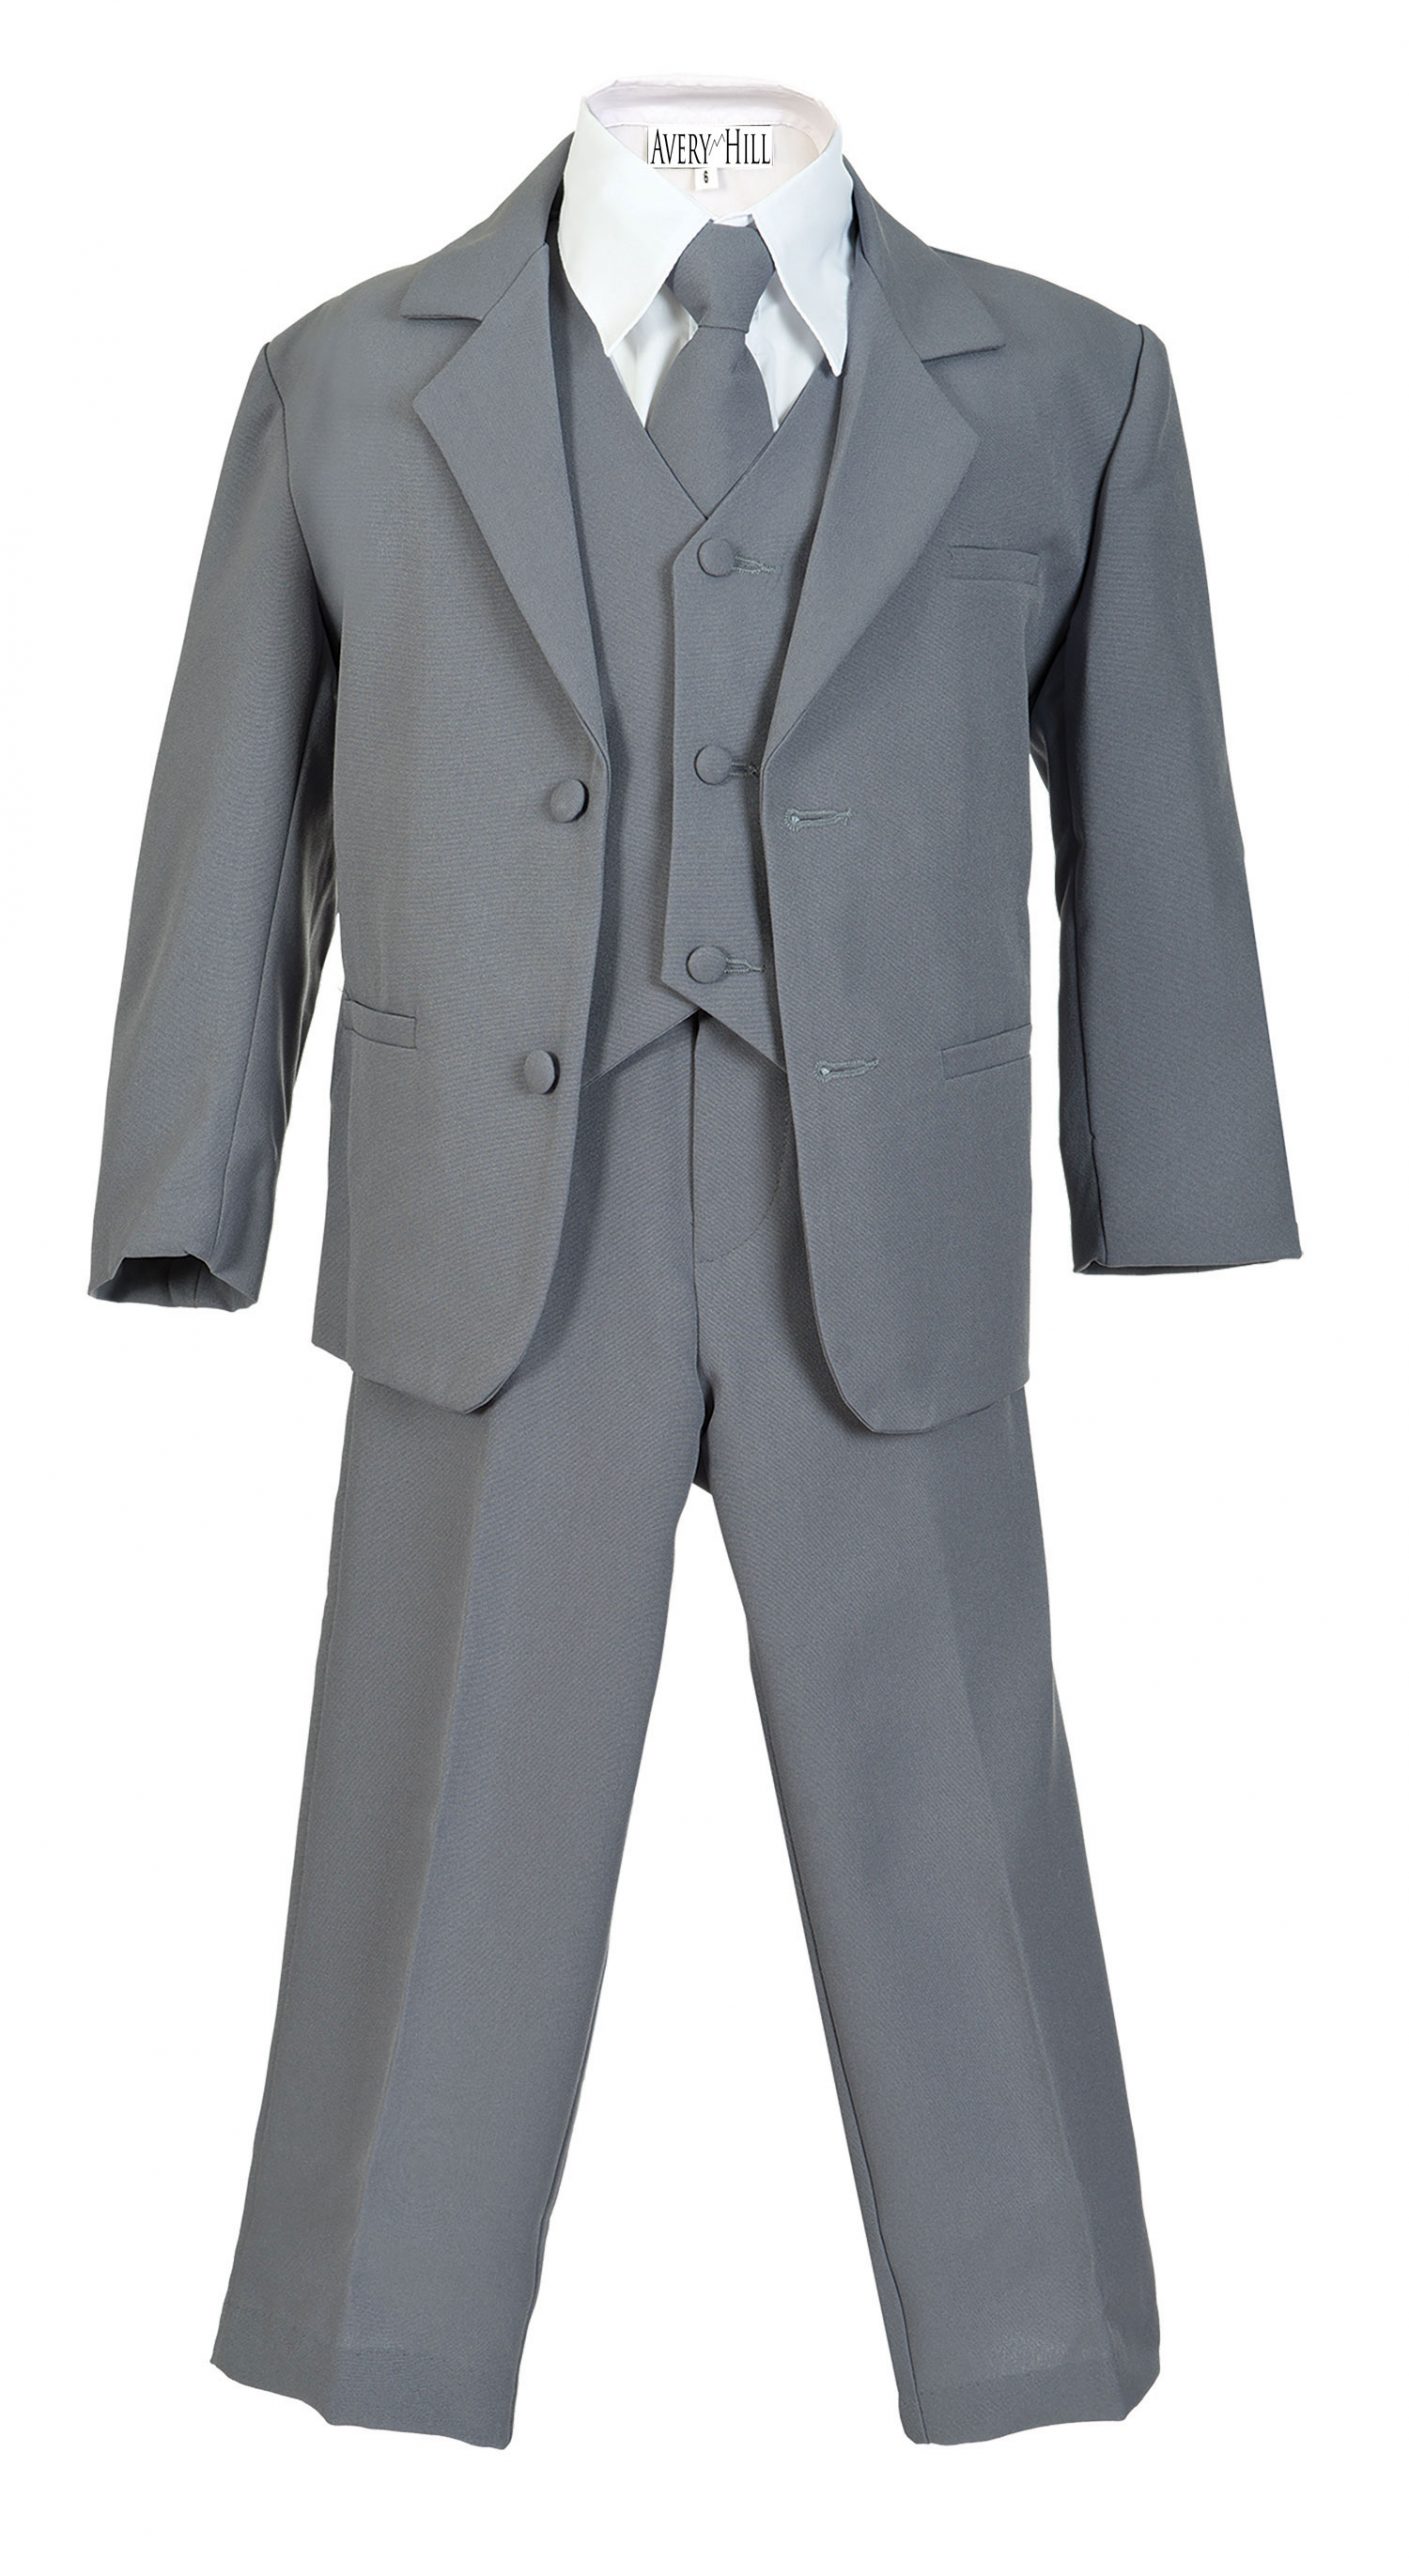 Avery Hill Boys Formal 5 Piece Suit with Shirt and Vest Slate Gray - S